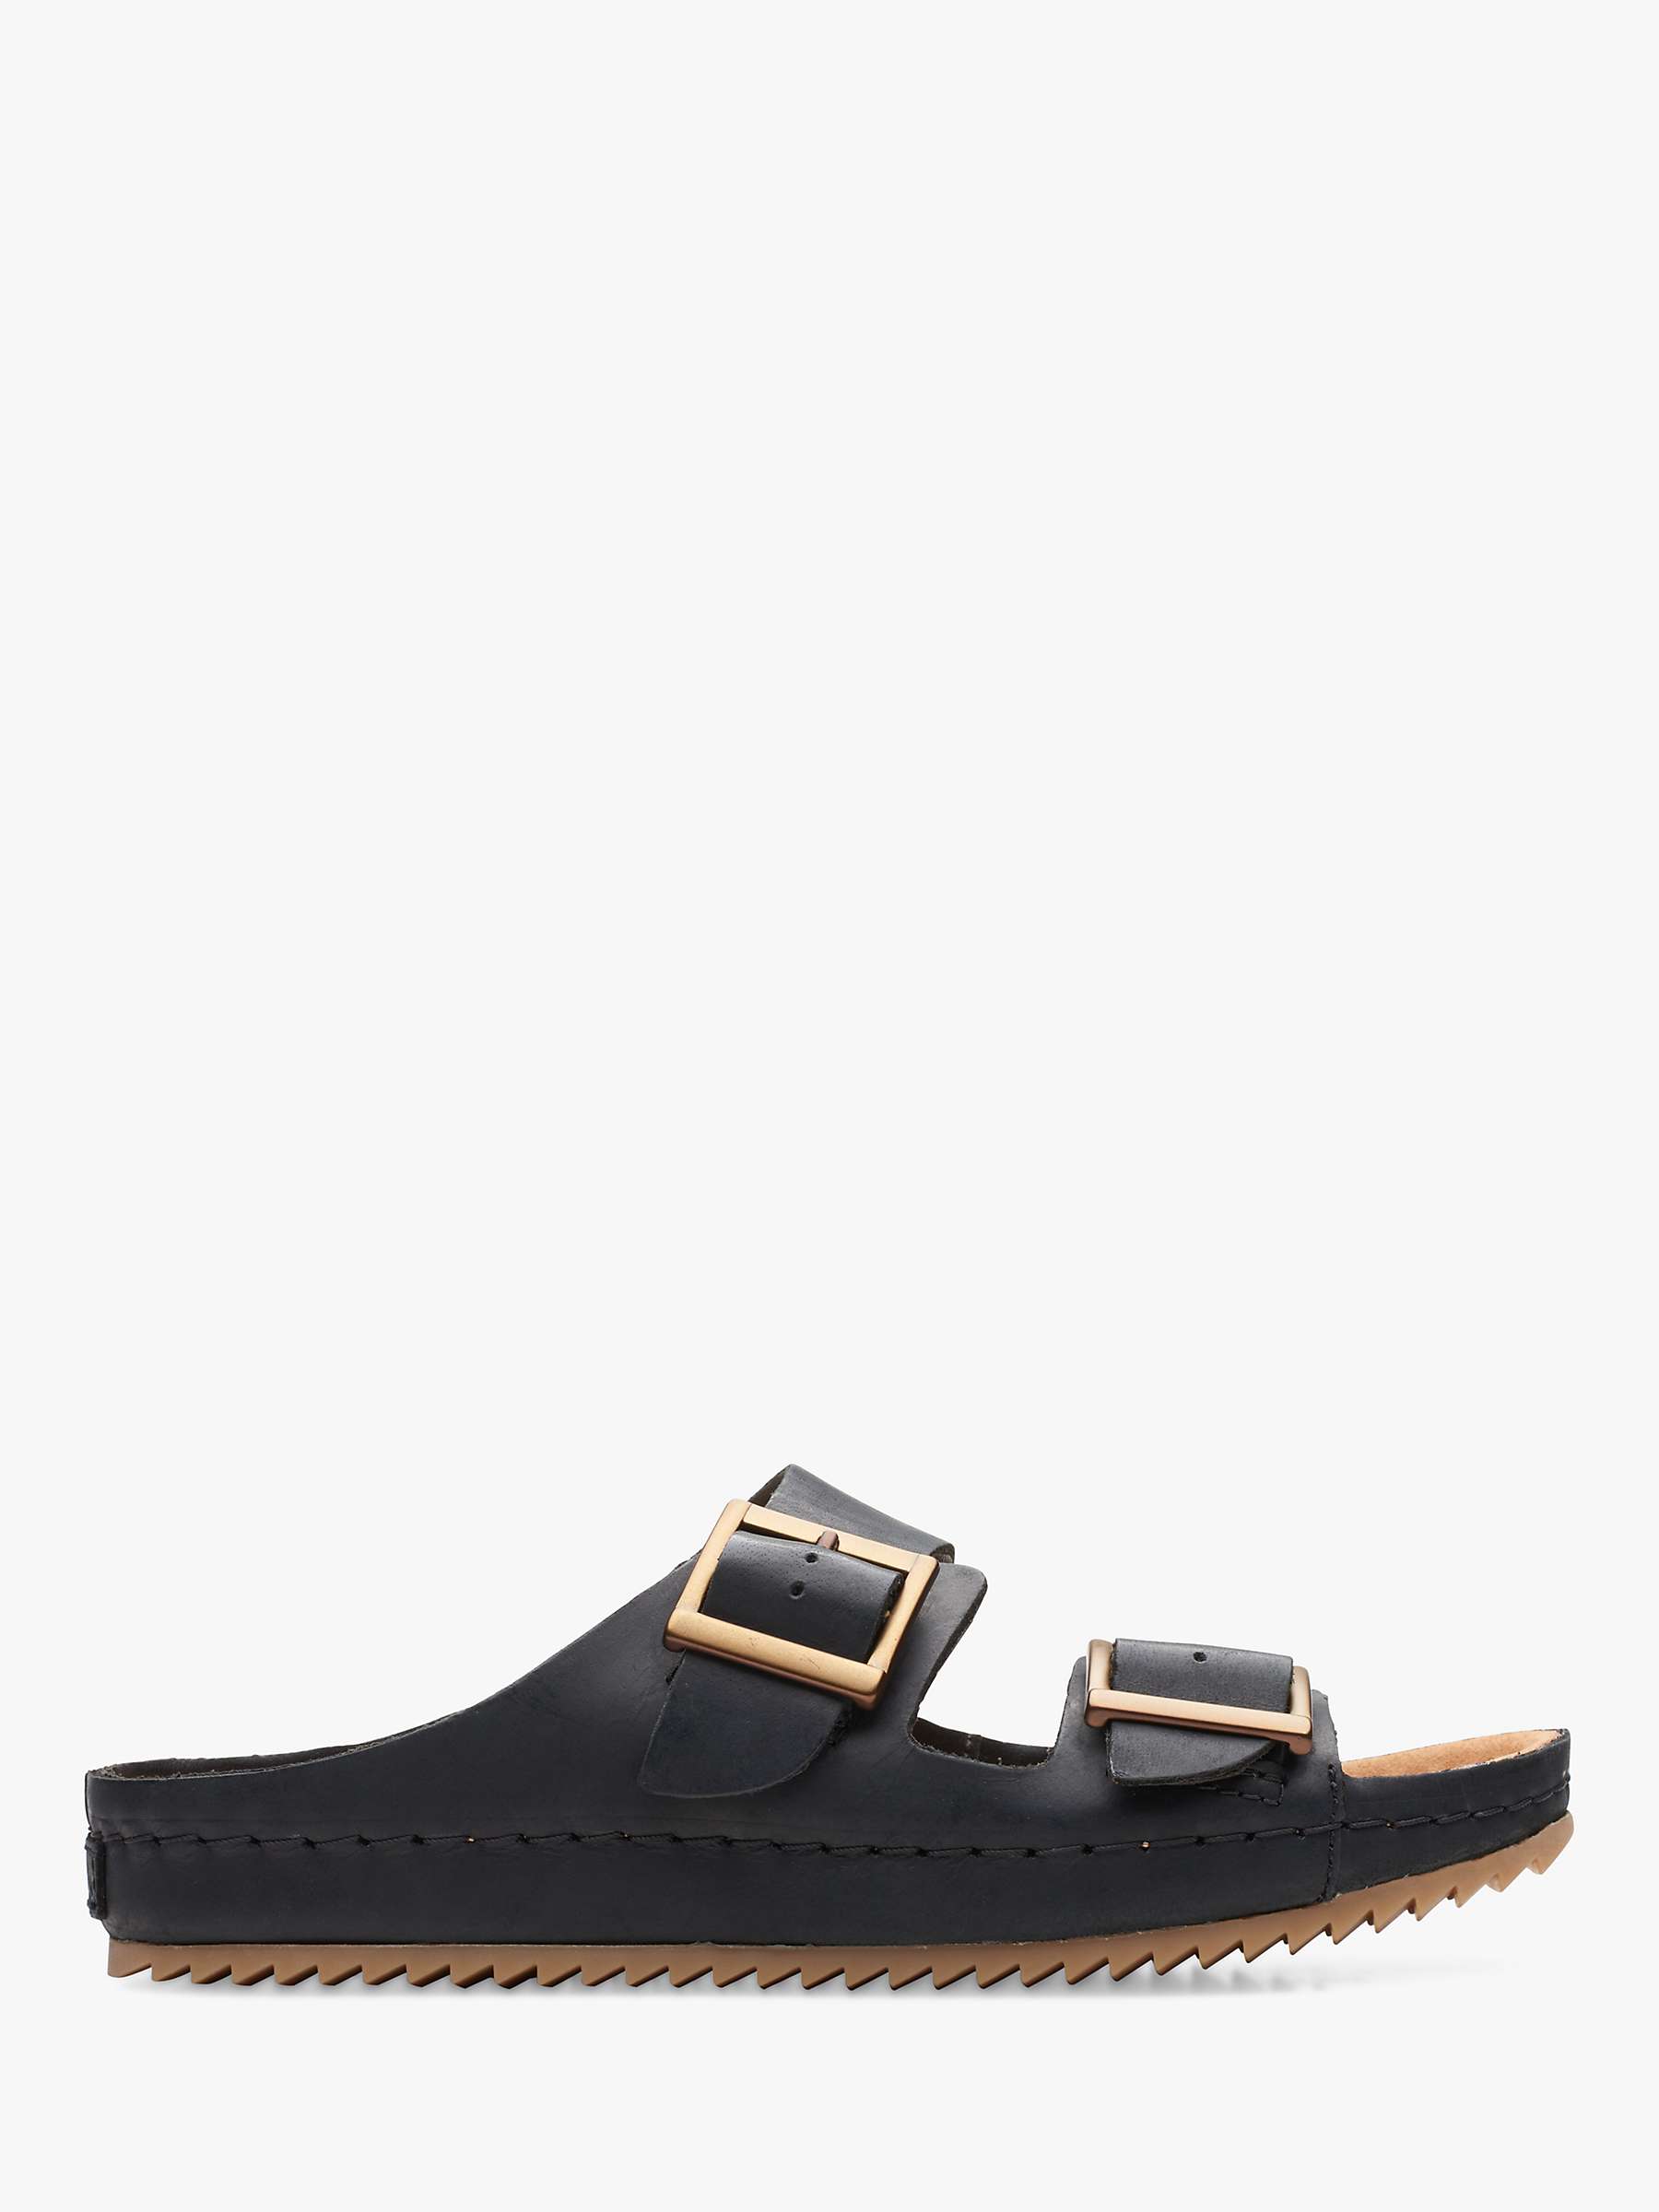 Clarks Brookleigh Sun Leather Footbed Sandals, Black at John Lewis ...